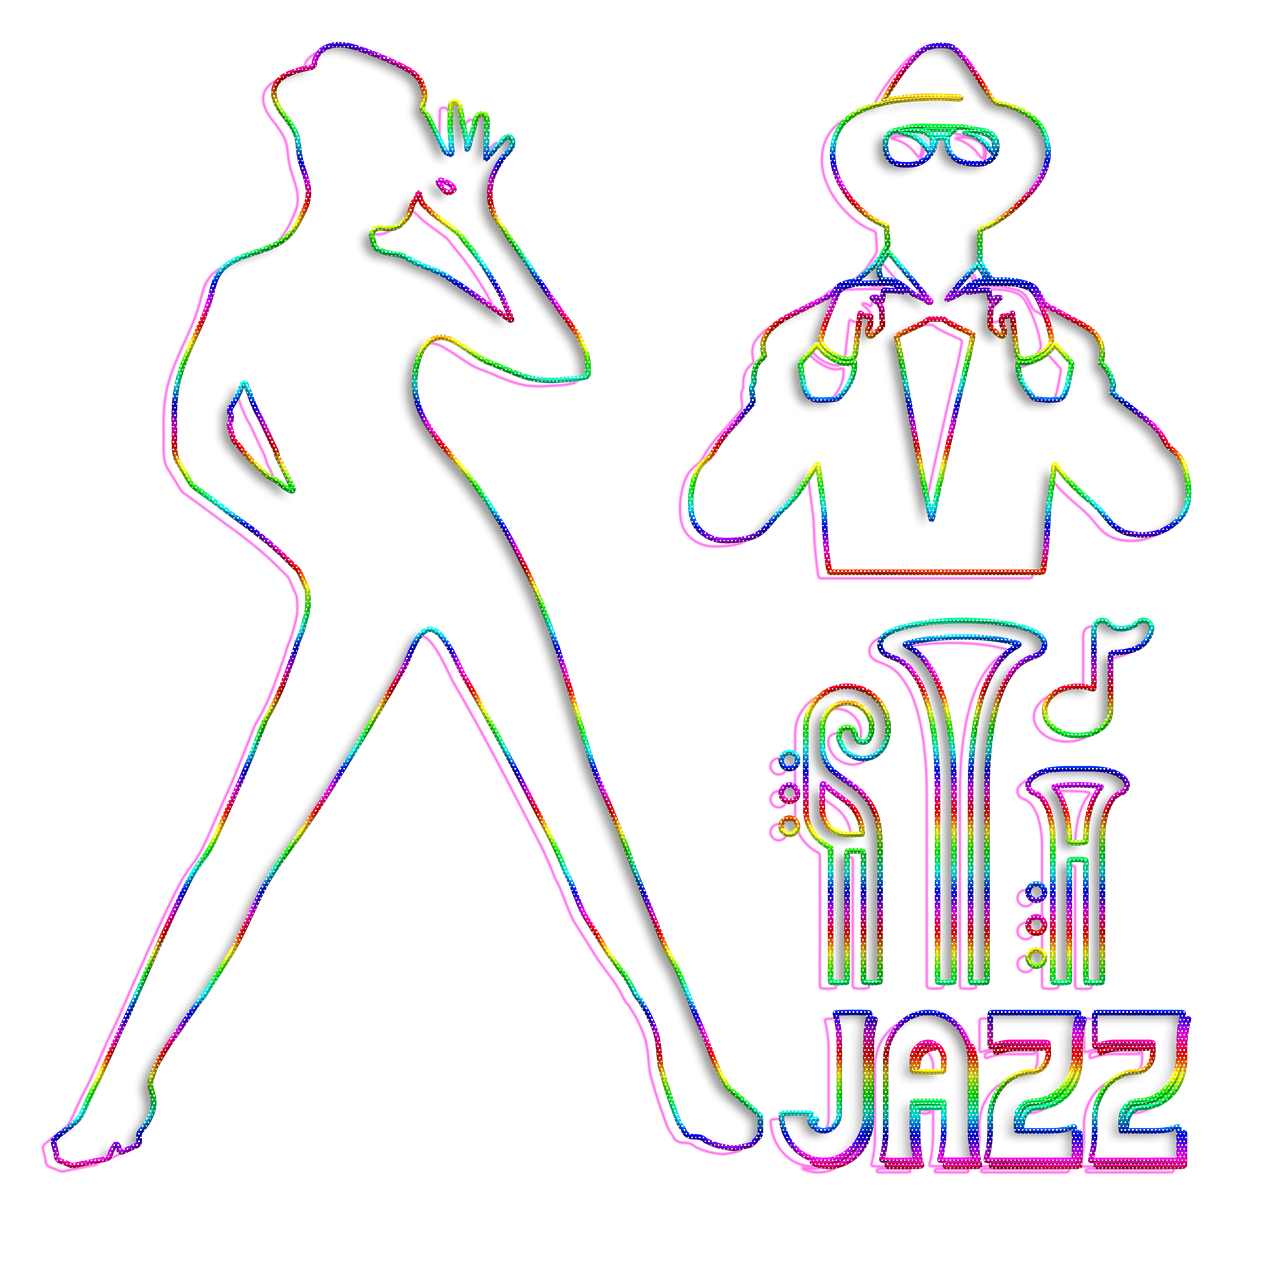 a neon drawing of a man talking on a cell phone, funk art, marcel marcel and metzinger, jazz album cover, vector line - art style, dancers